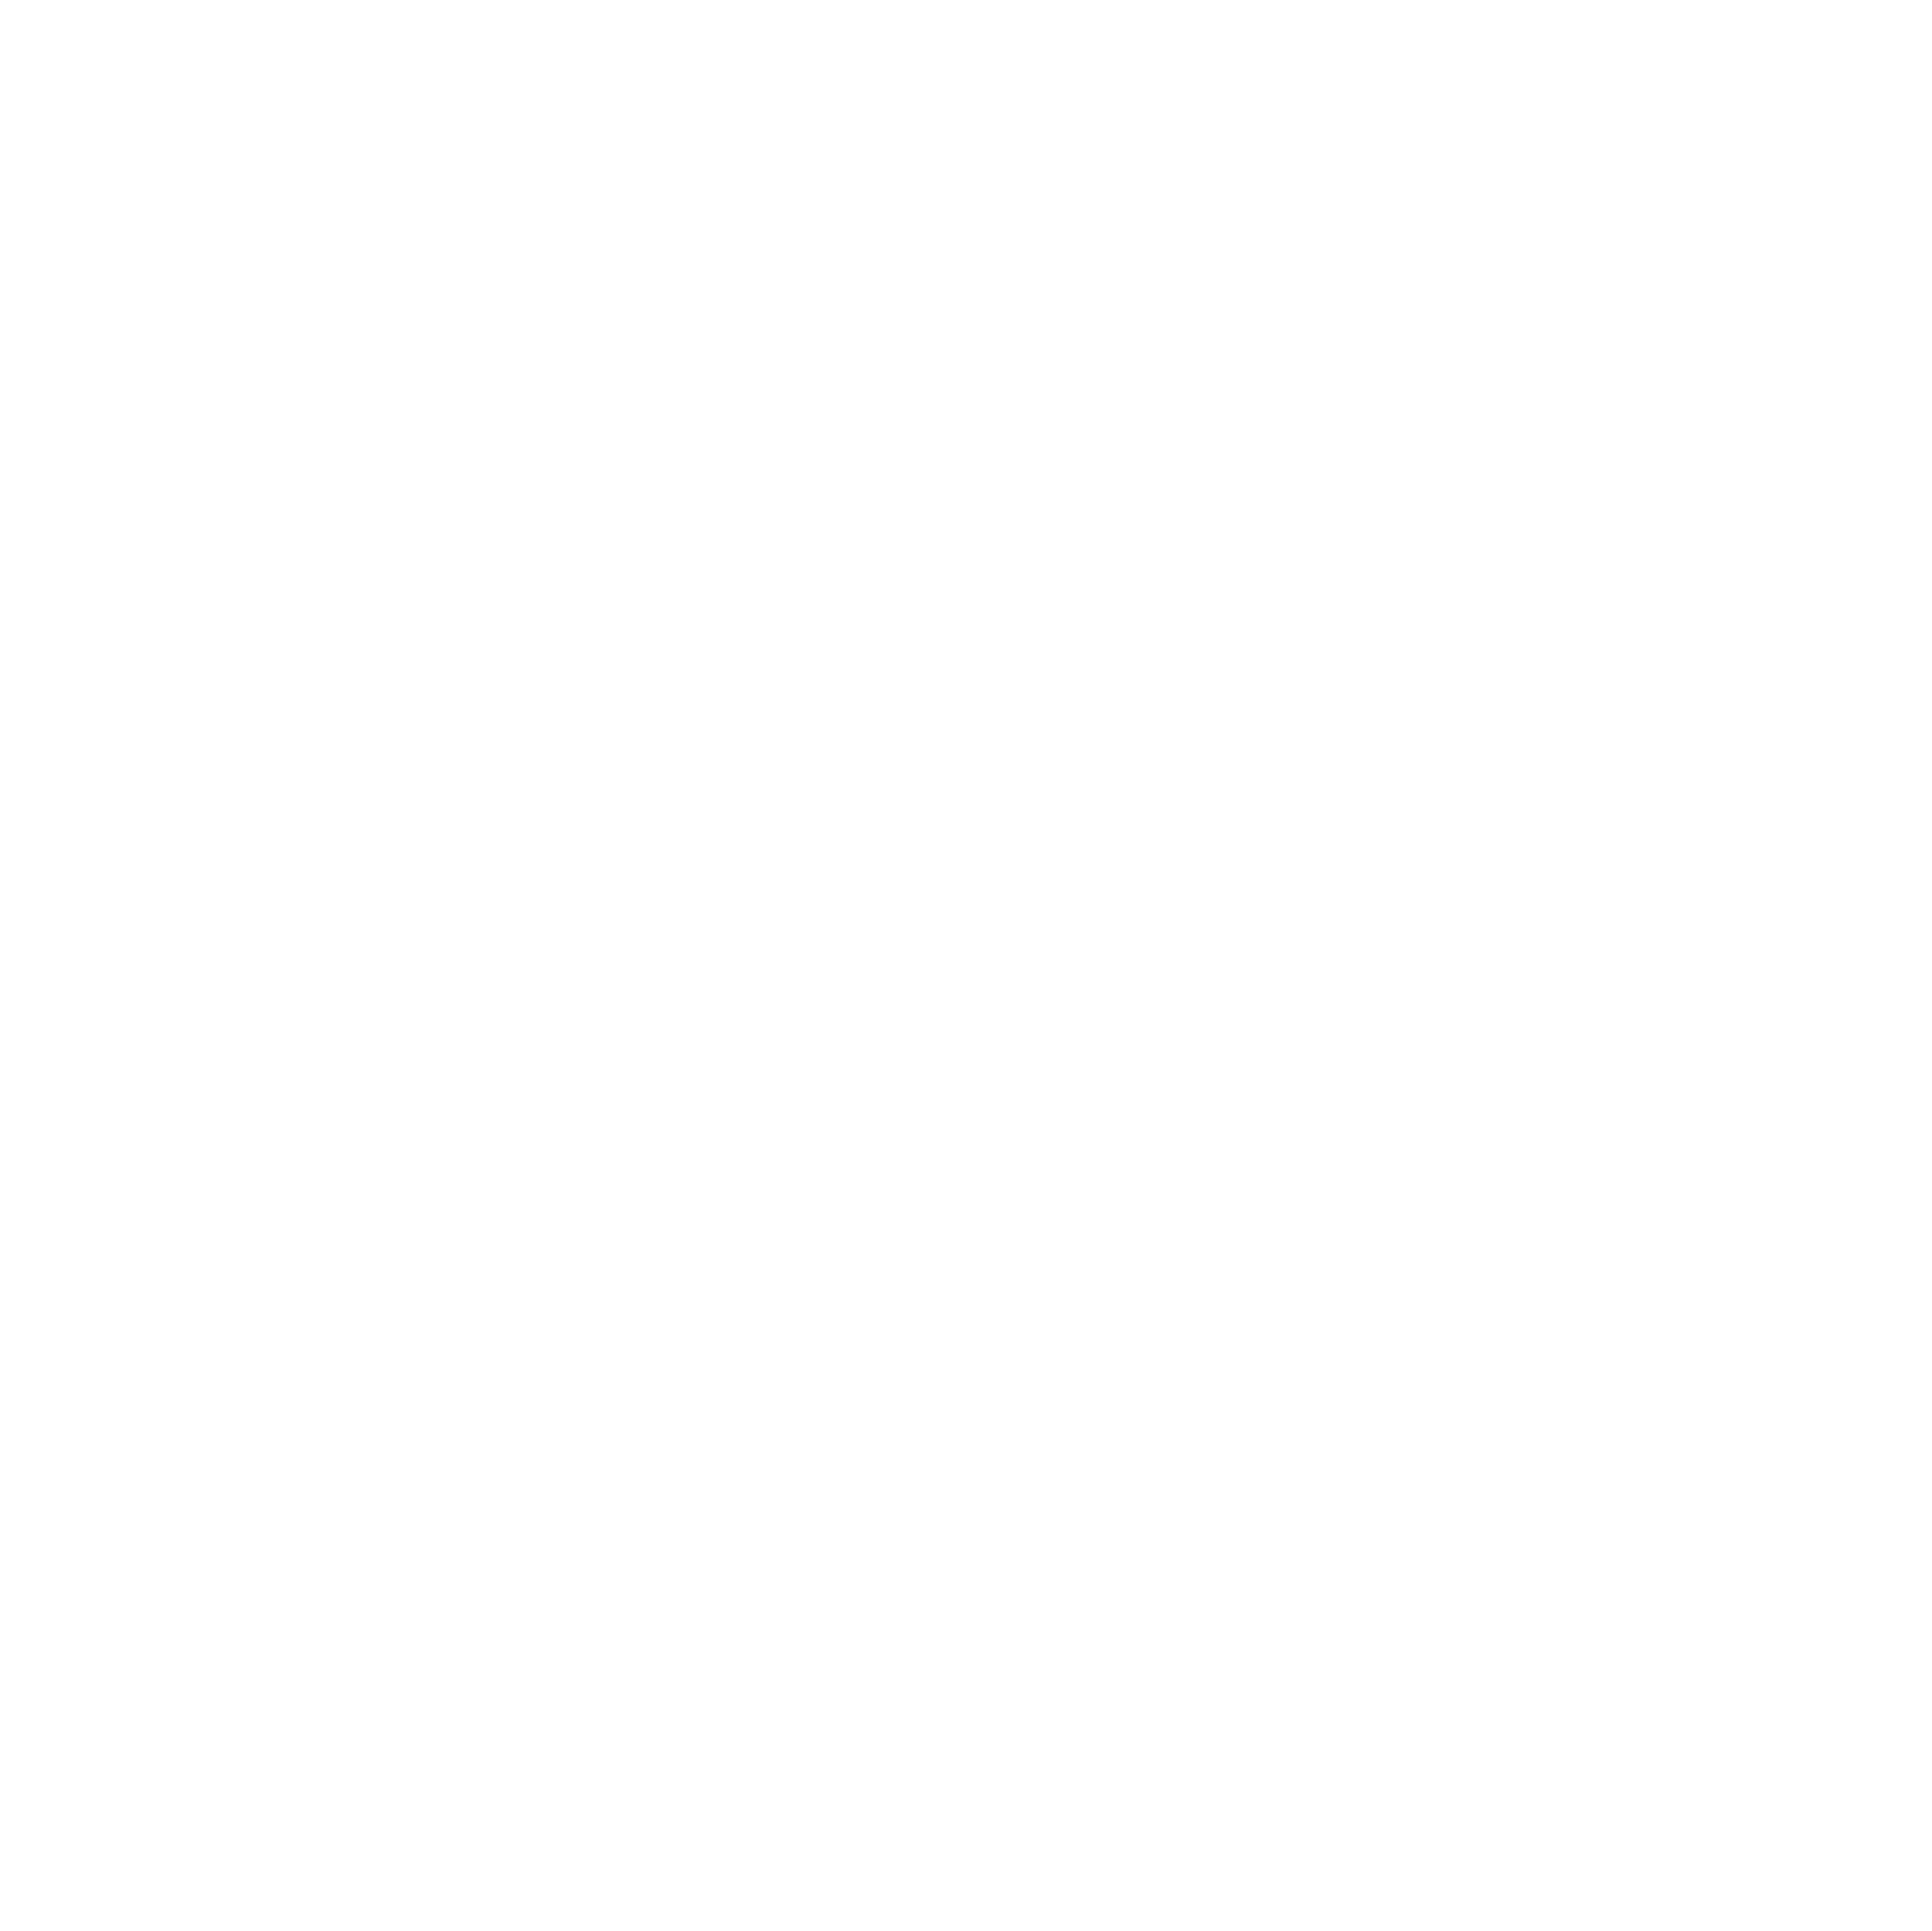 Shooter Logo - Active Shooter. Compliance Training. Make Your Campus Safer Today